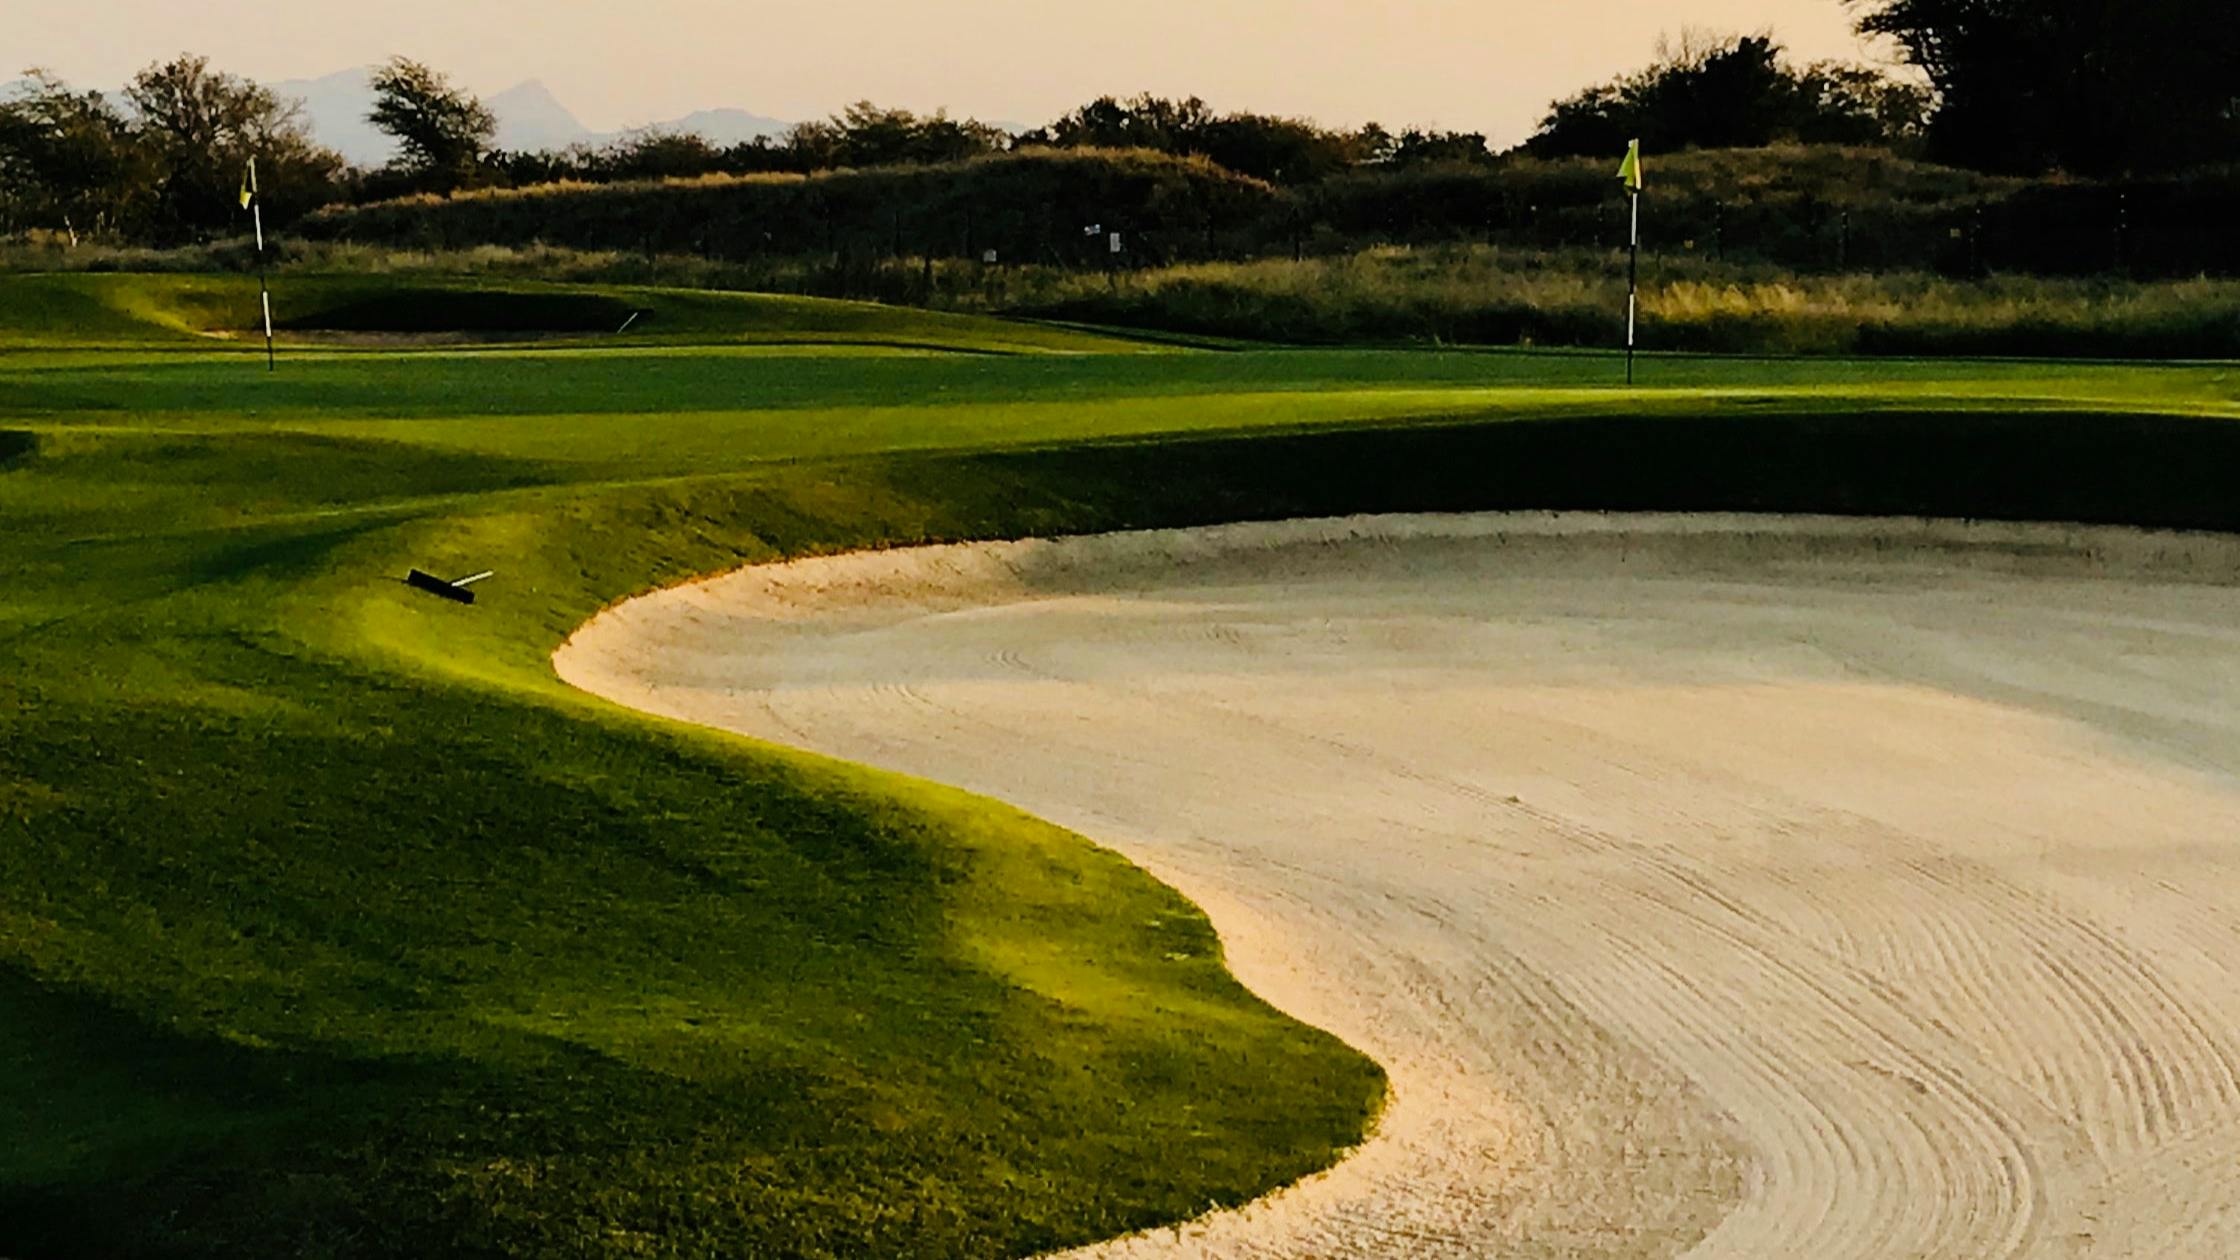 A close up of a sand pit on a golf hole.